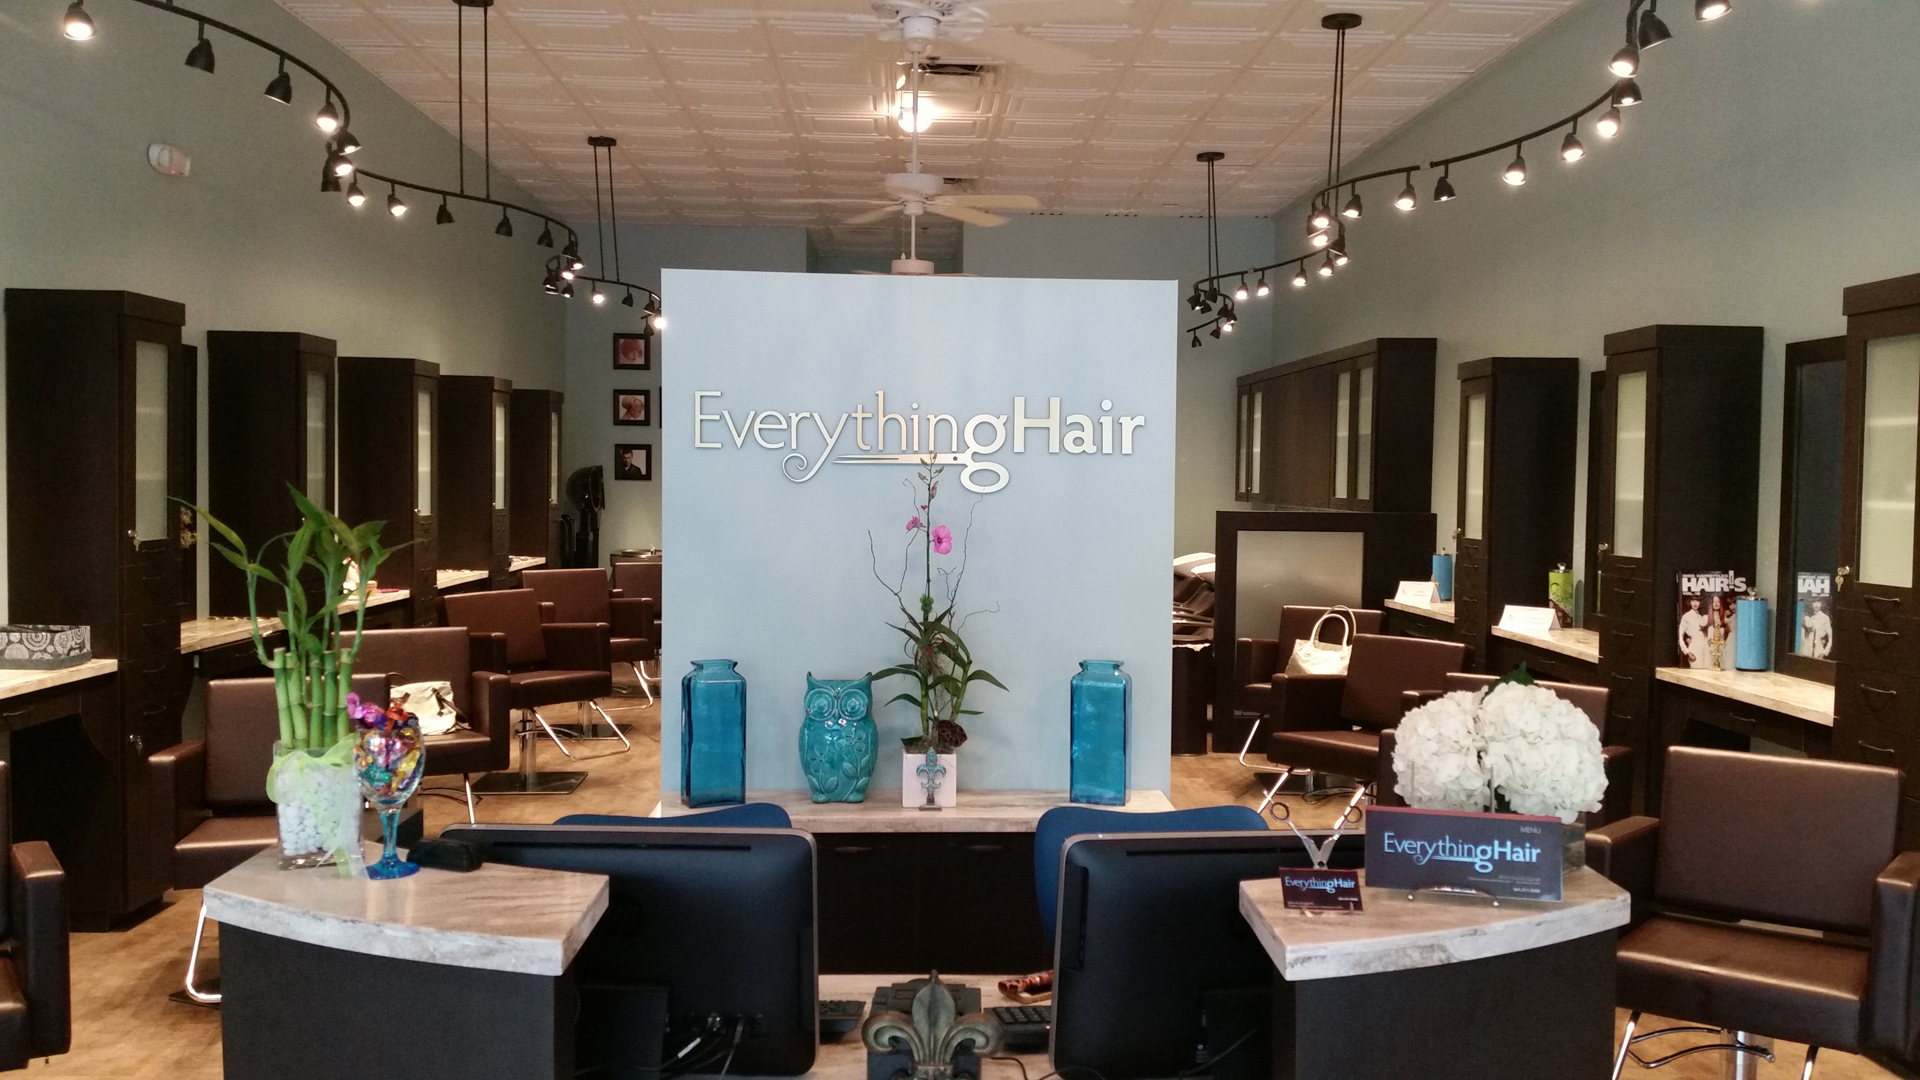 EverythingHair - Boca | Everything Hair is a full-service hair salon  located in Boca Raton, Florida. Our highly-qualified team of stylists is  here to surpass your expectations in a relaxing professional atmosphere.